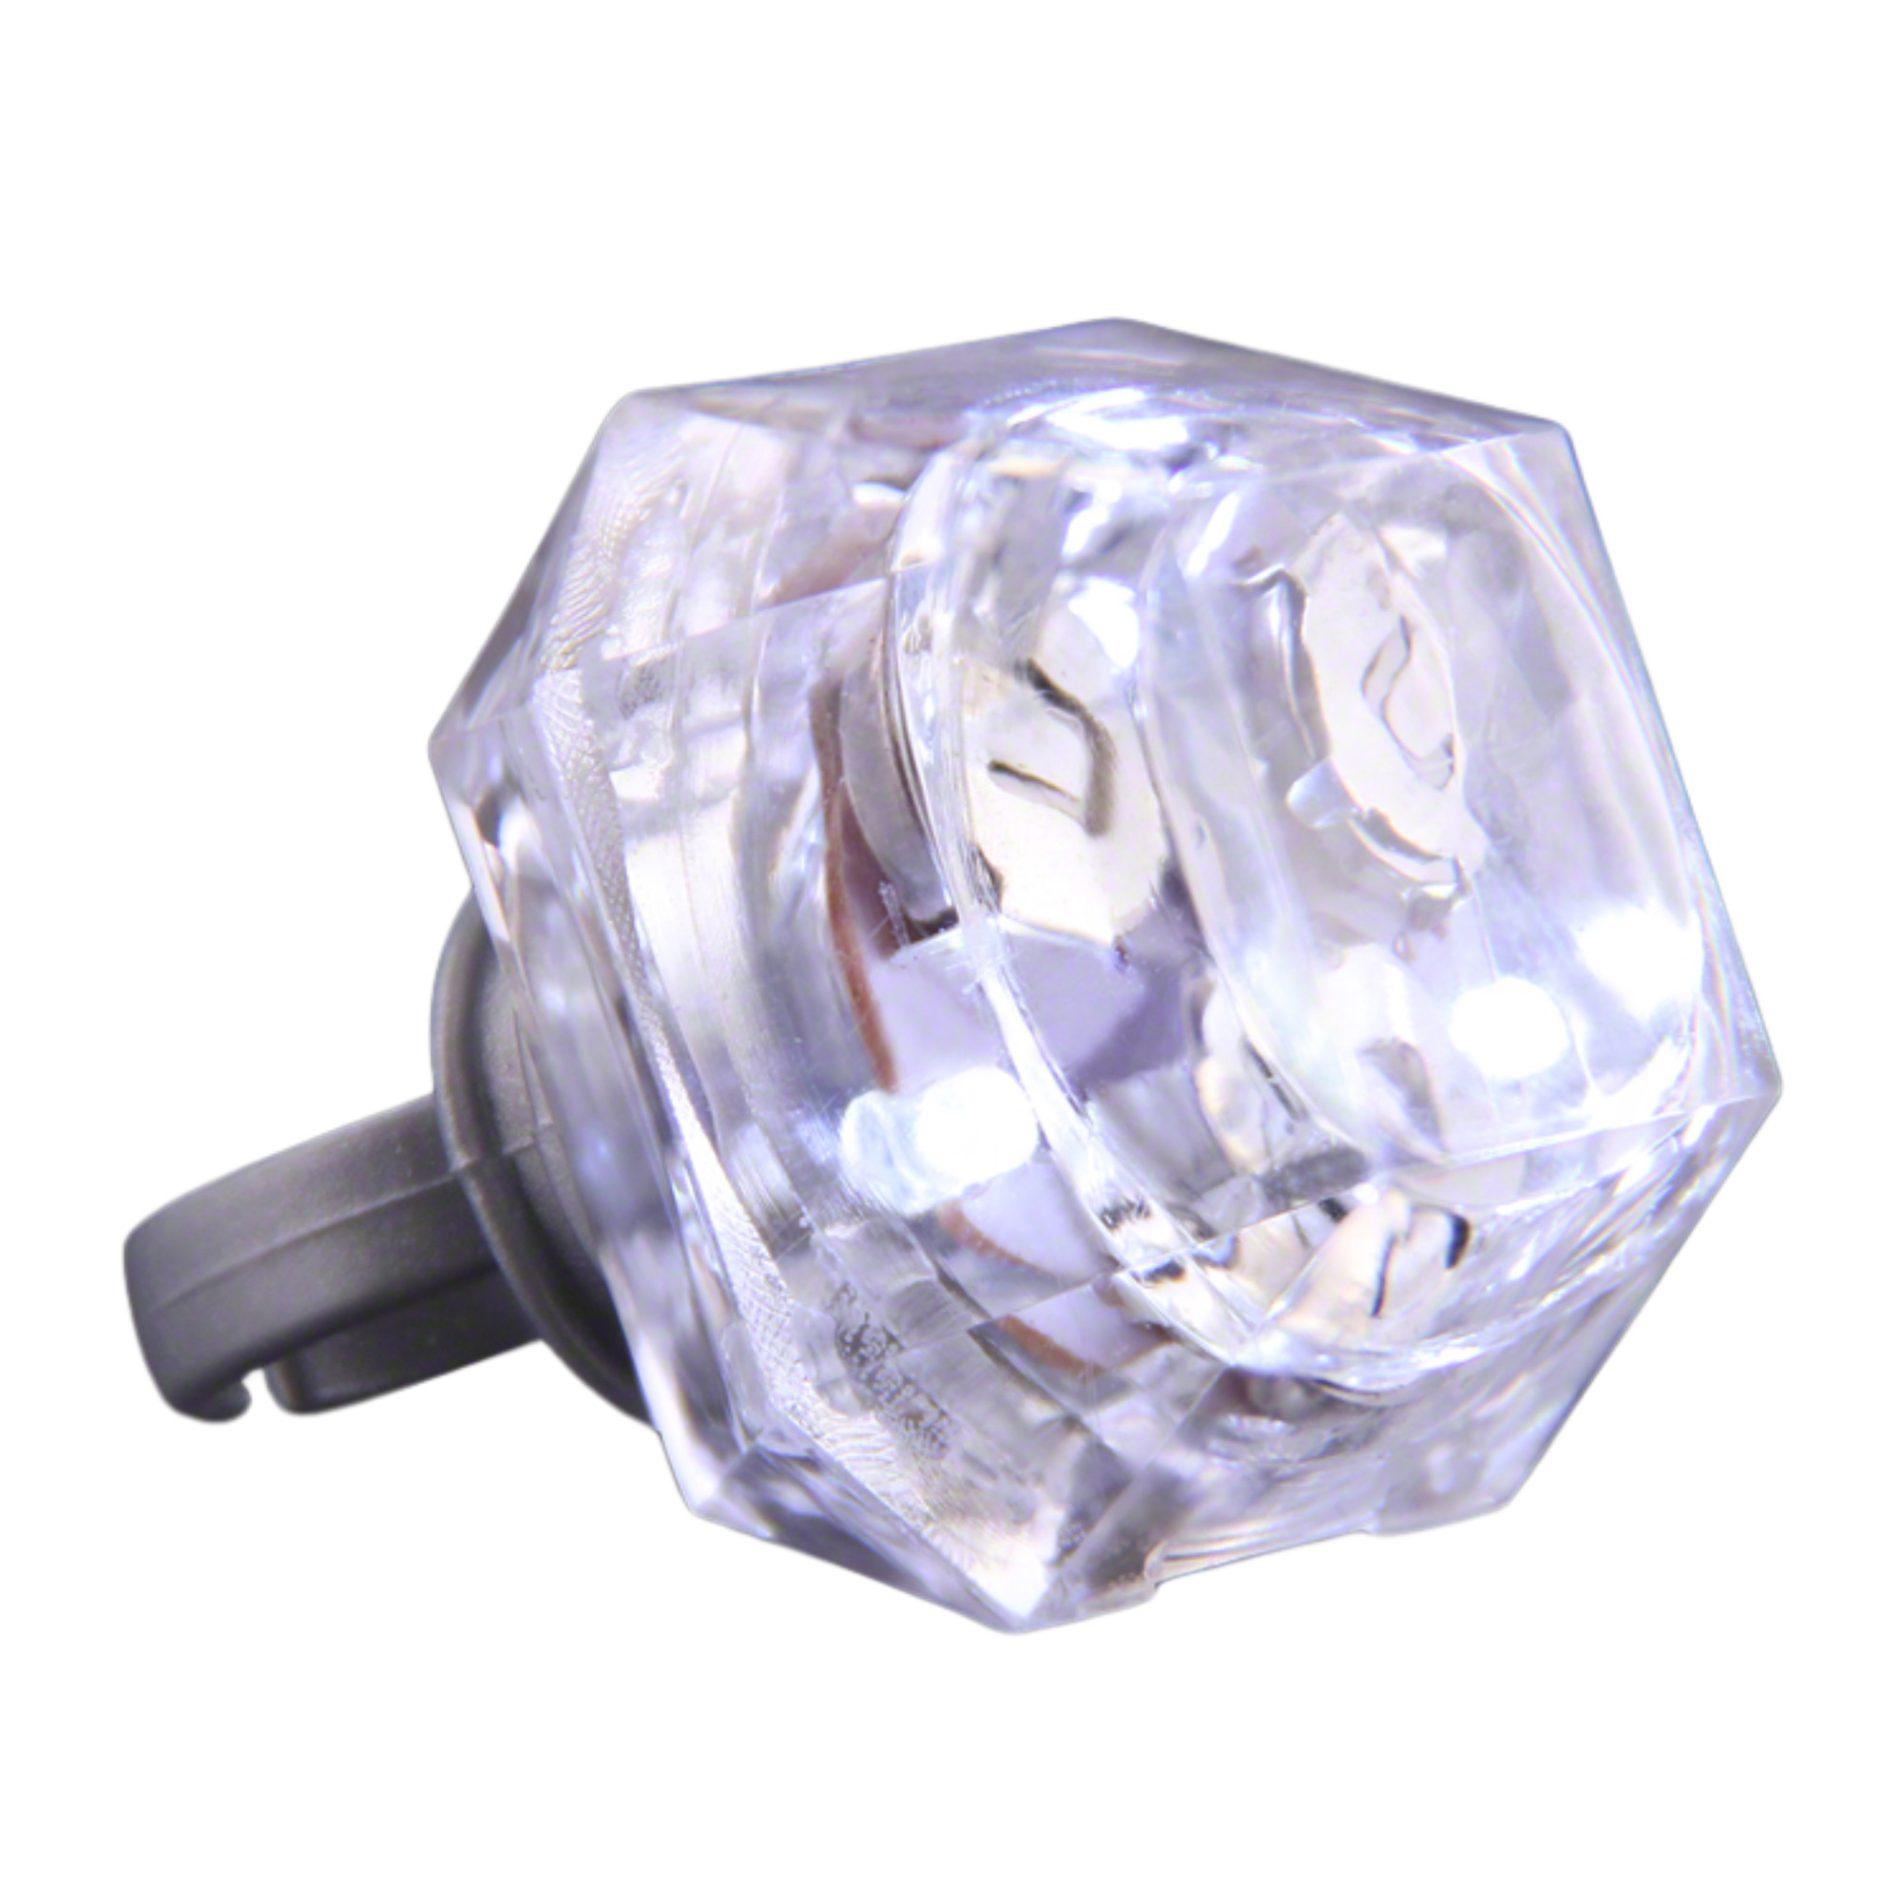 Huge Gem Flashing Rings Pack of 24 All Products 8